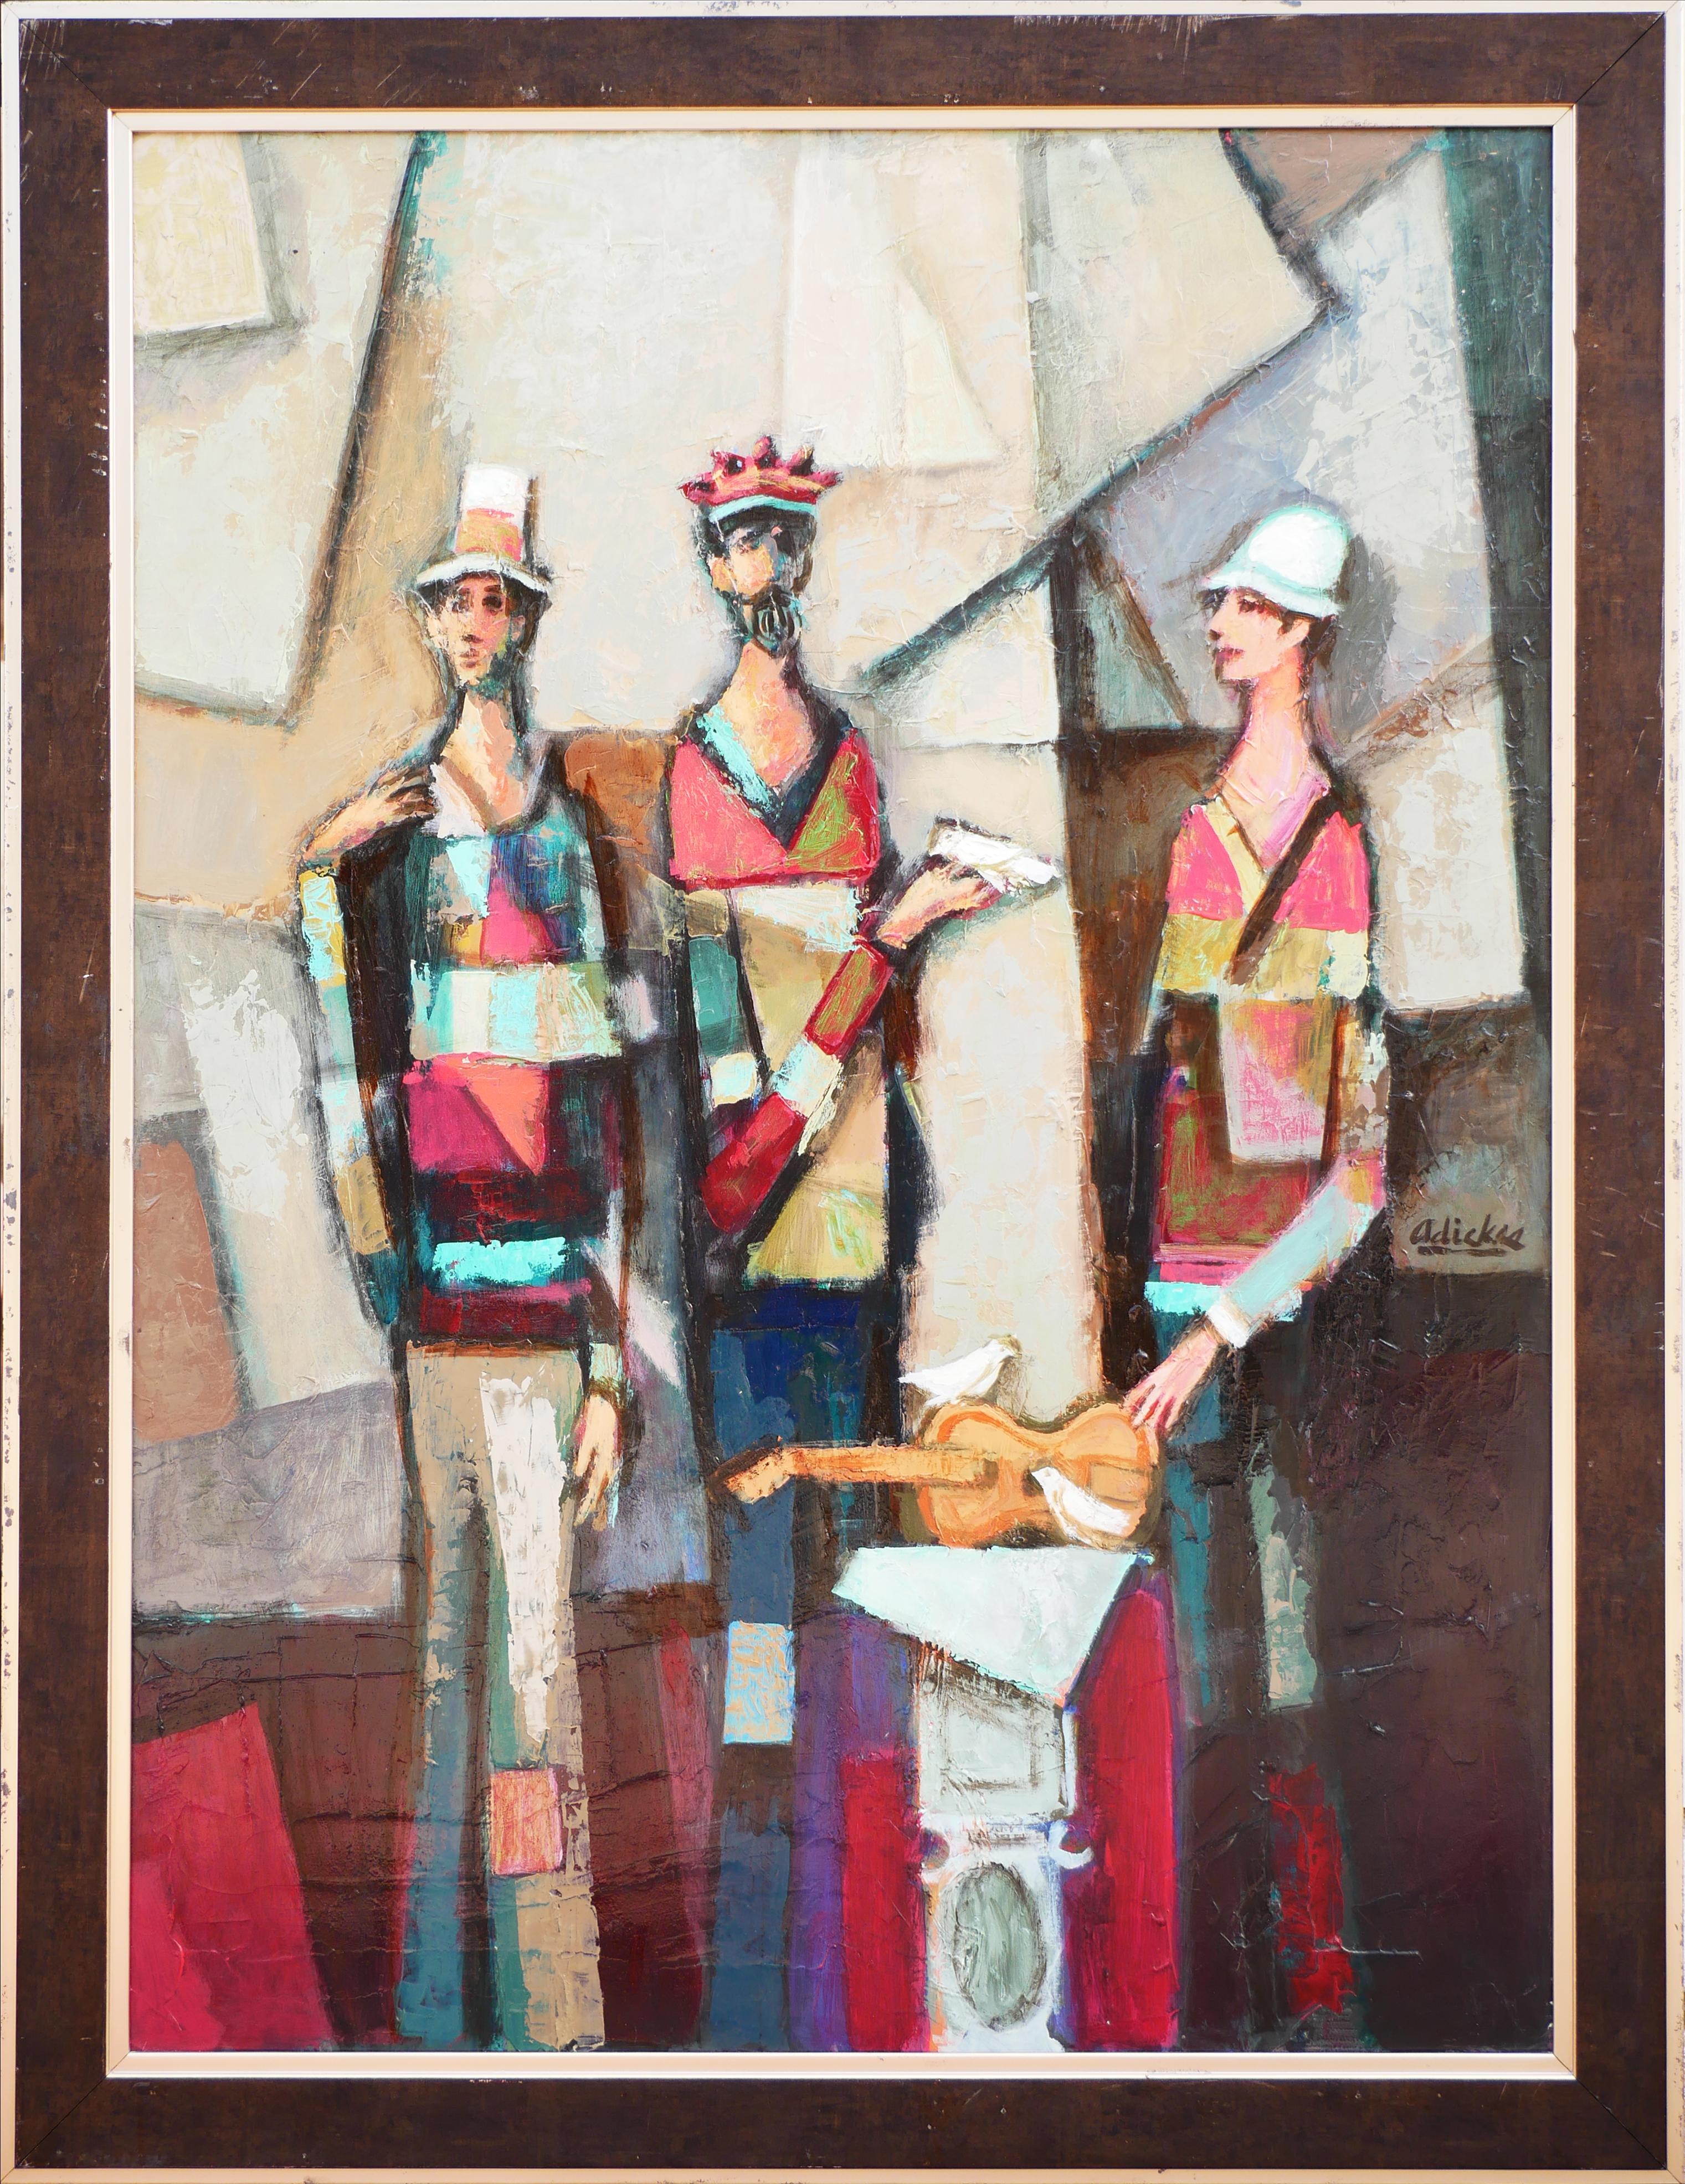 Modern abstract figurative group portrait painting by Houston, TX artist David Adickes. The work features a central grouping of three elongated figures with birds set against a light, Cubist inspired background. Signed by the artist in the front